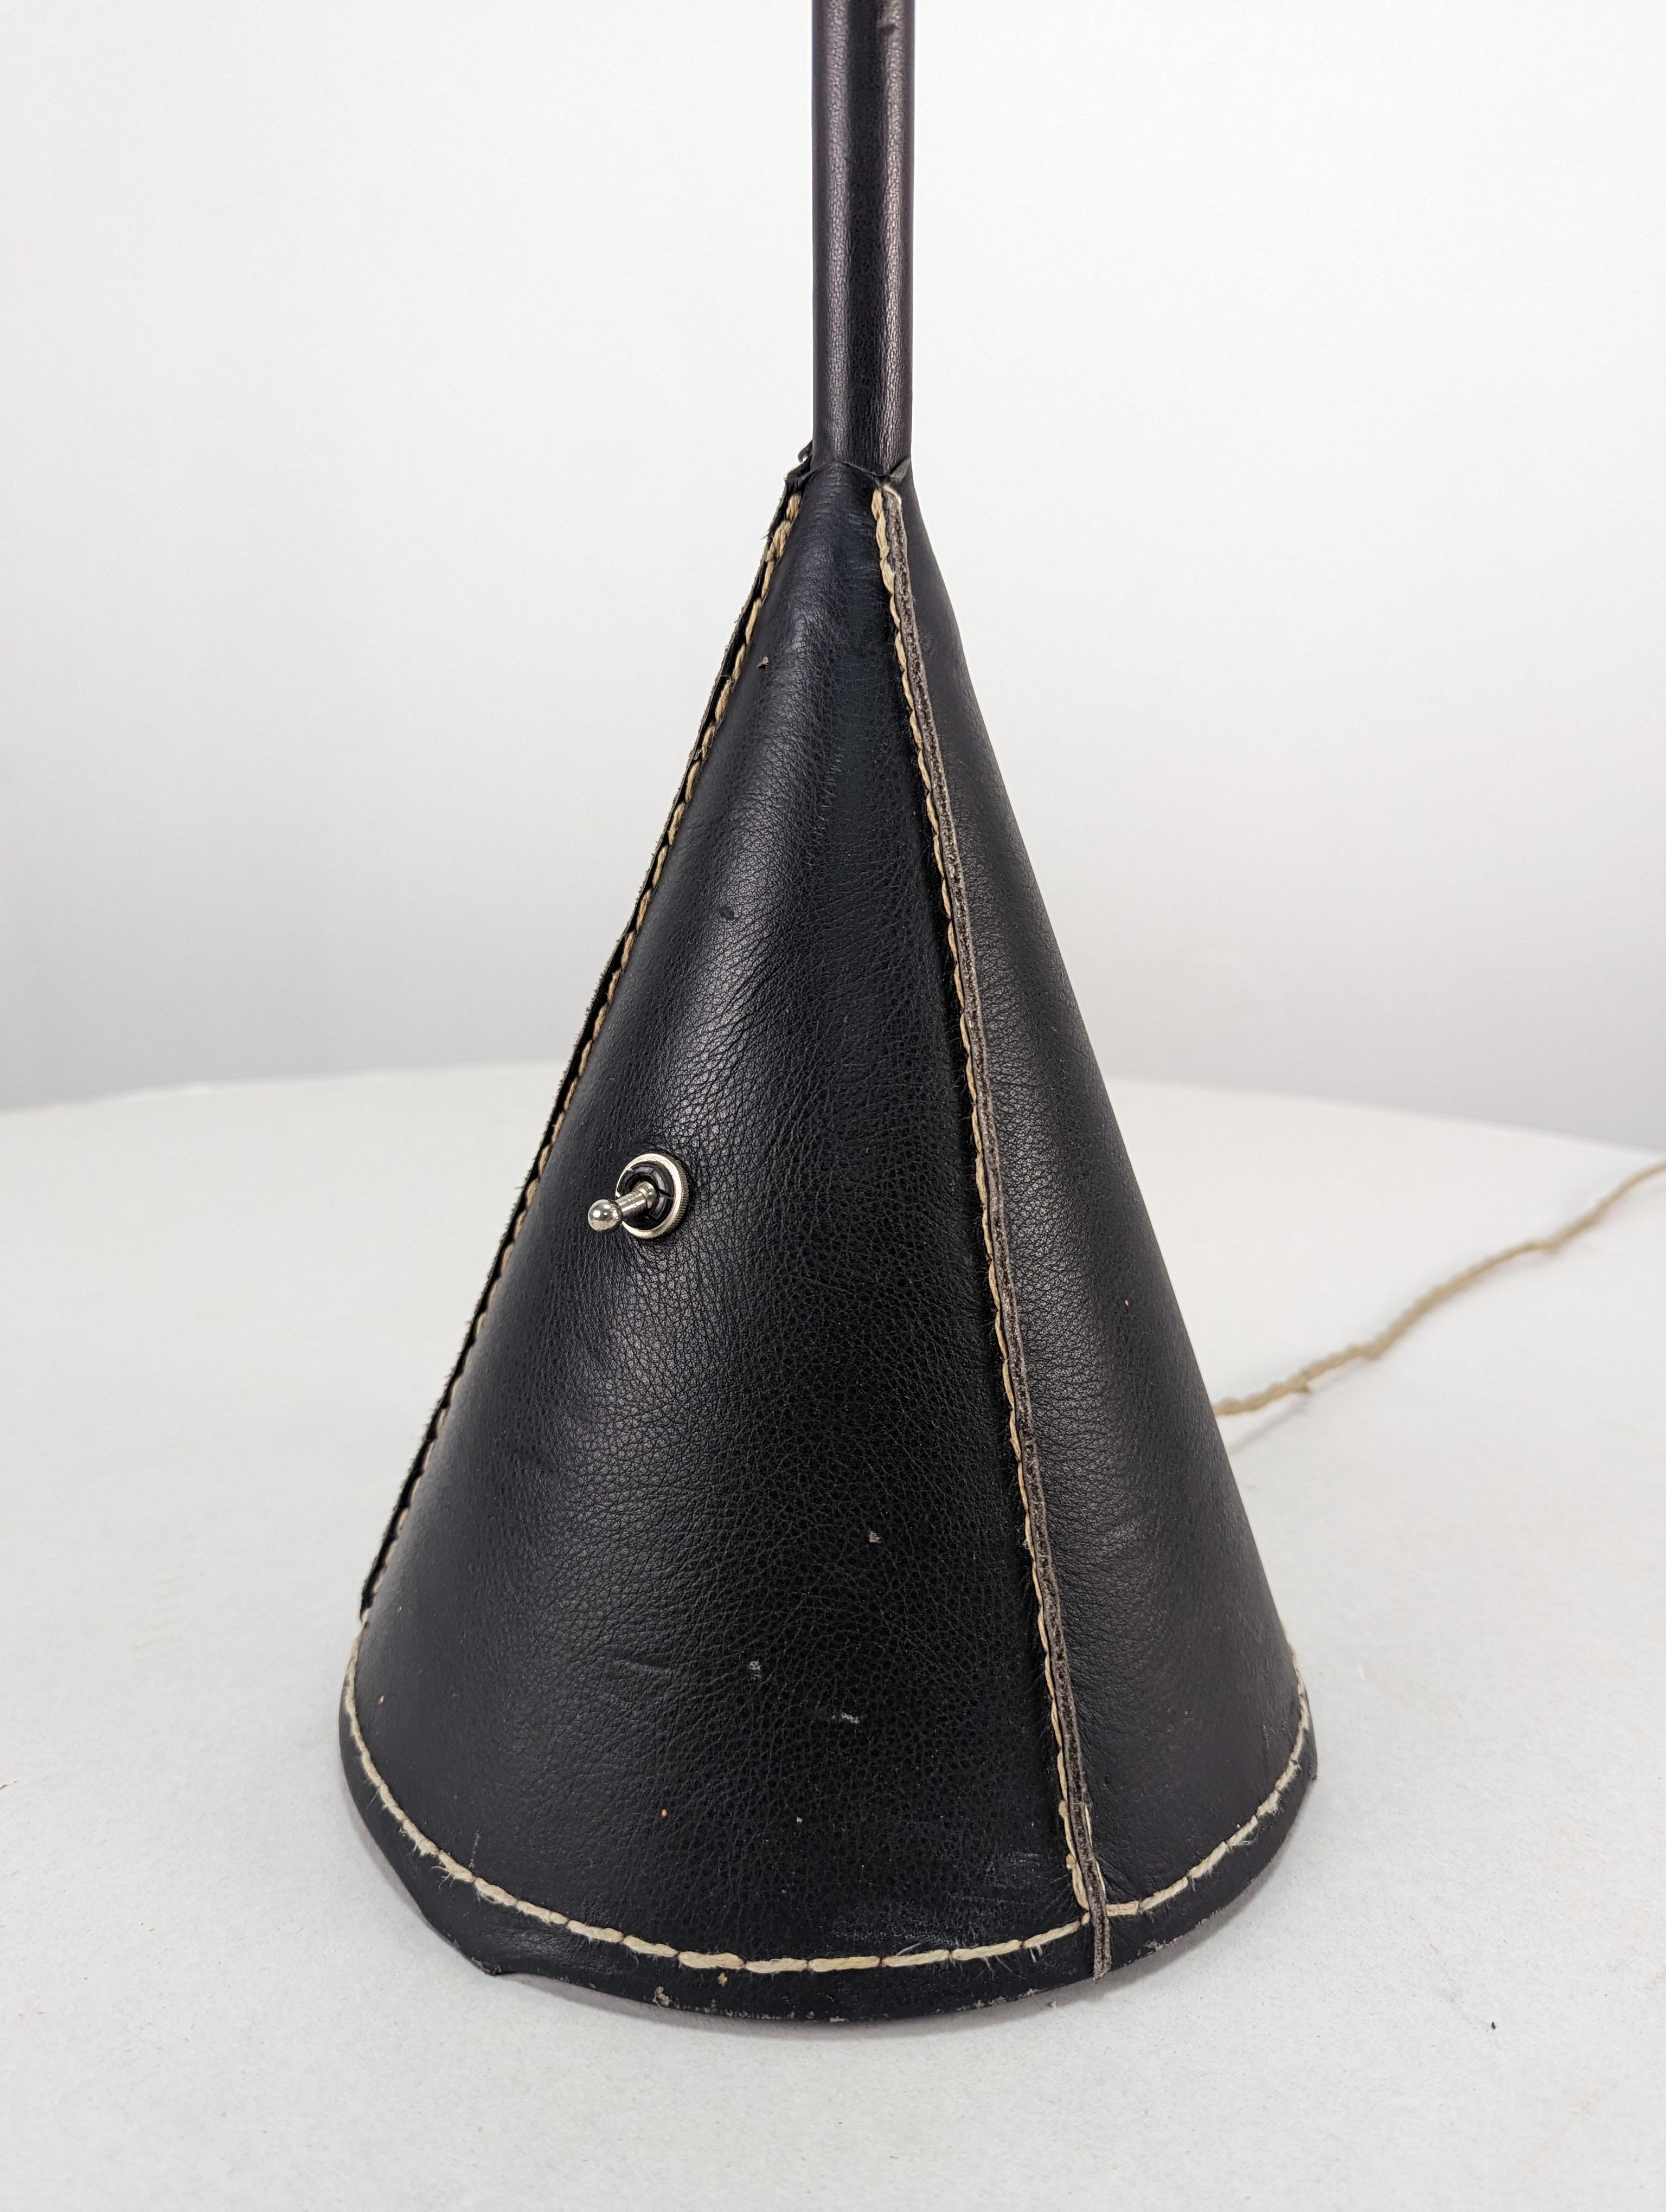 European Floor Lamp by Jacques Adnet in Black Leather, 1950s